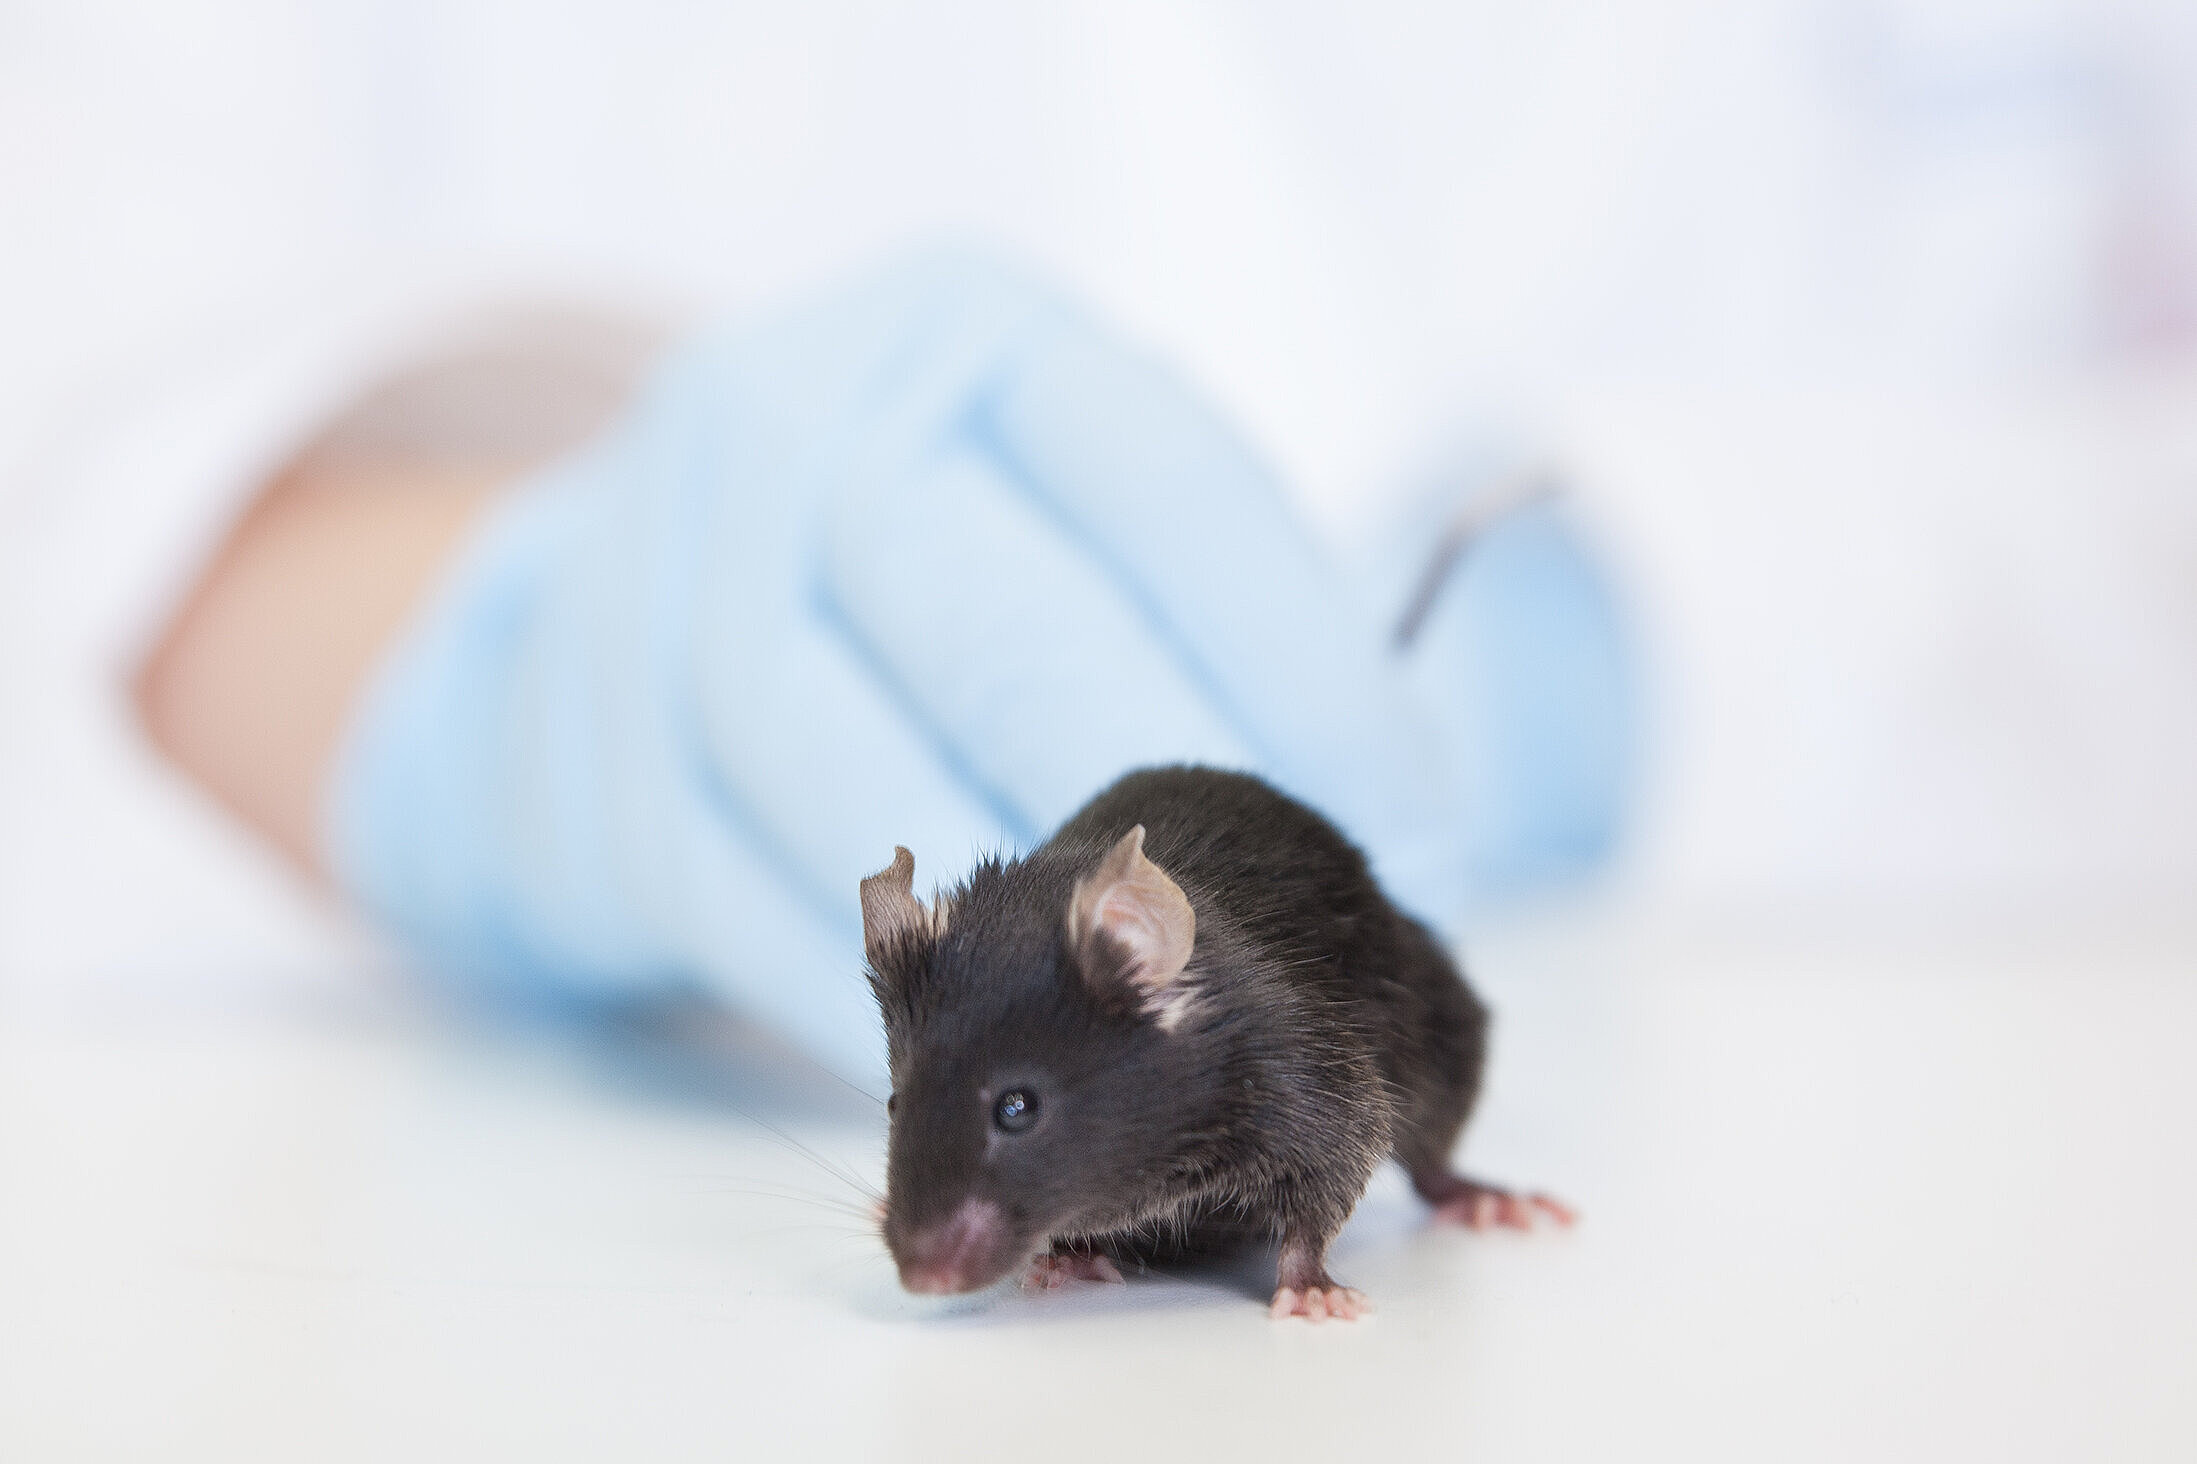 A black mouse is held by a person wearing blue laboratory gloves.